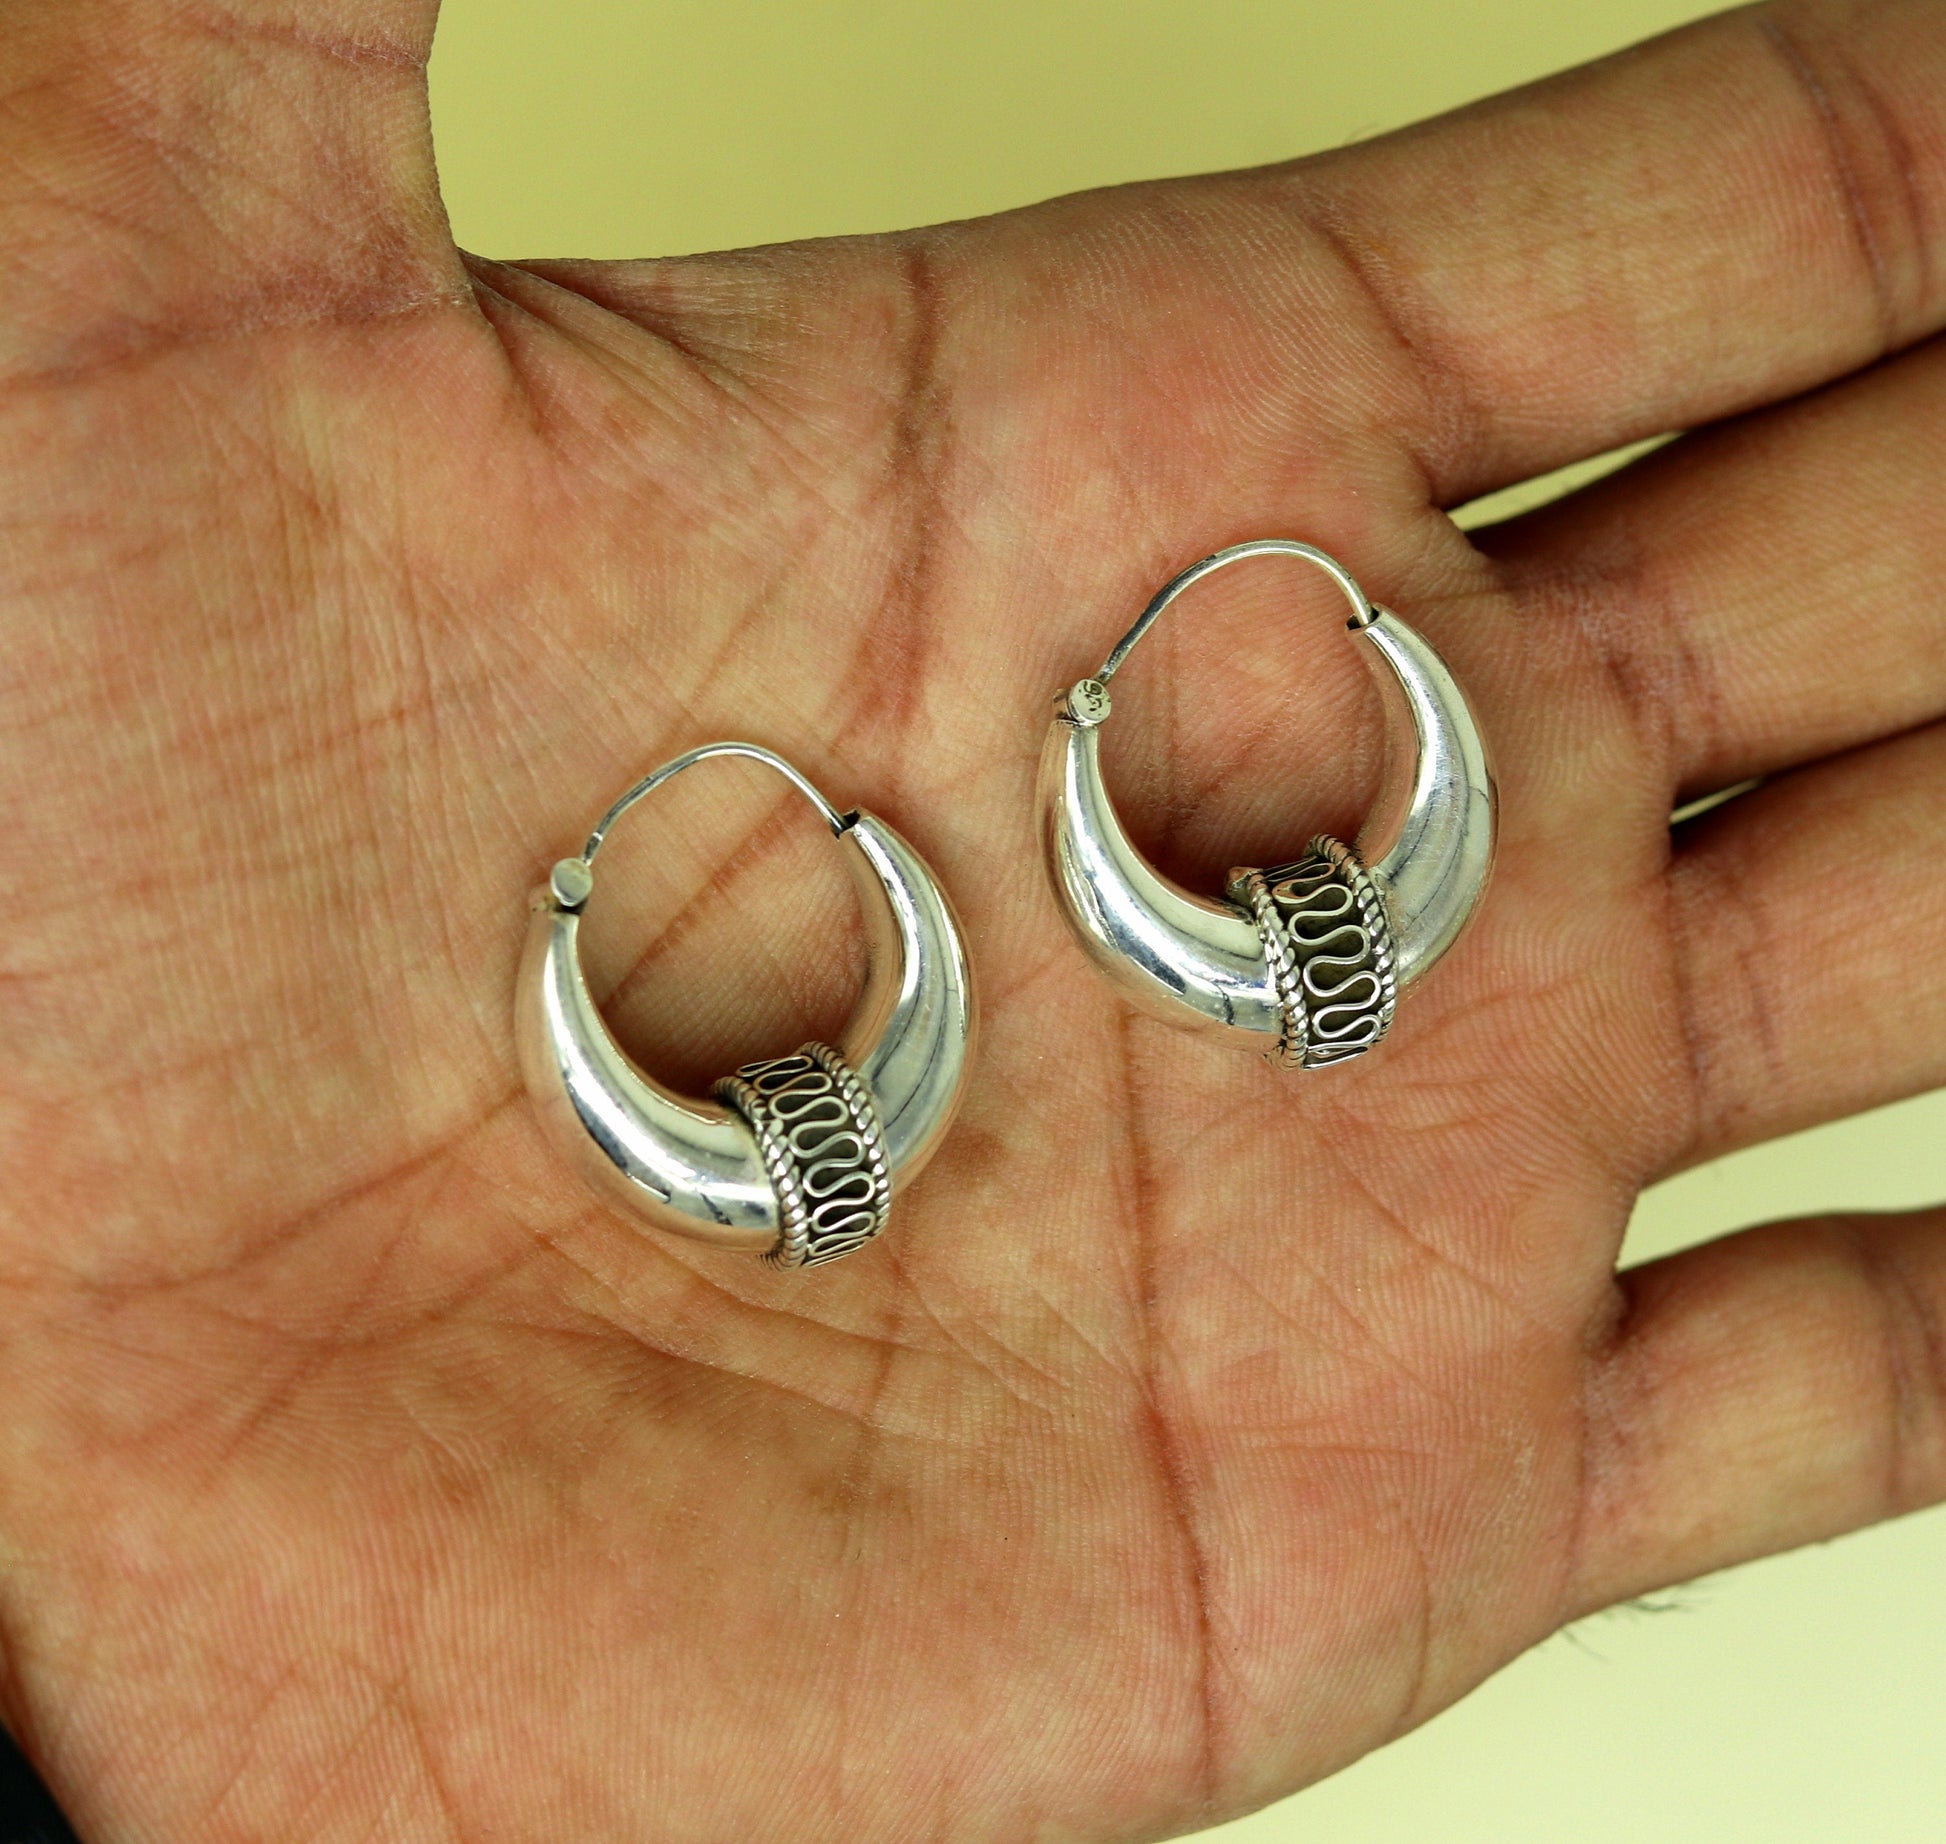 925 sterling silver handmade pretty attractive hoops stud earring bali, excellent customized stylish belly dance personalized gift ske11 - TRIBAL ORNAMENTS